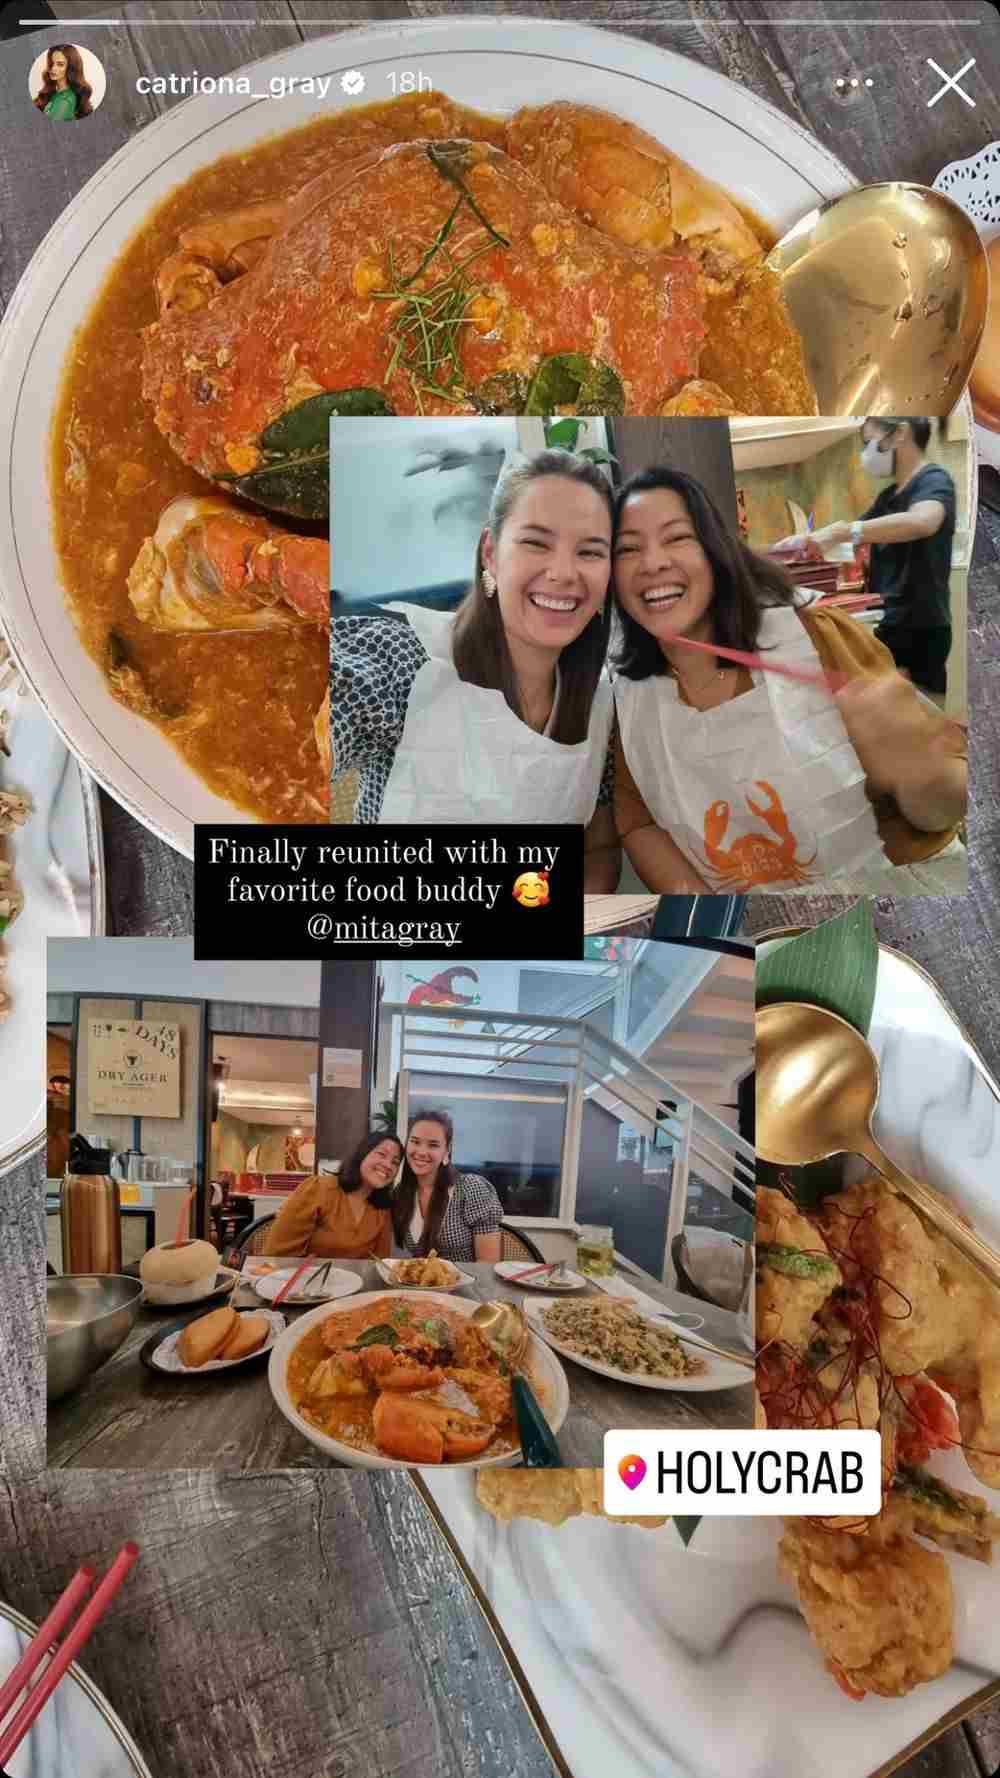 Catriona Gray reunites with her mom and favorite food buddy